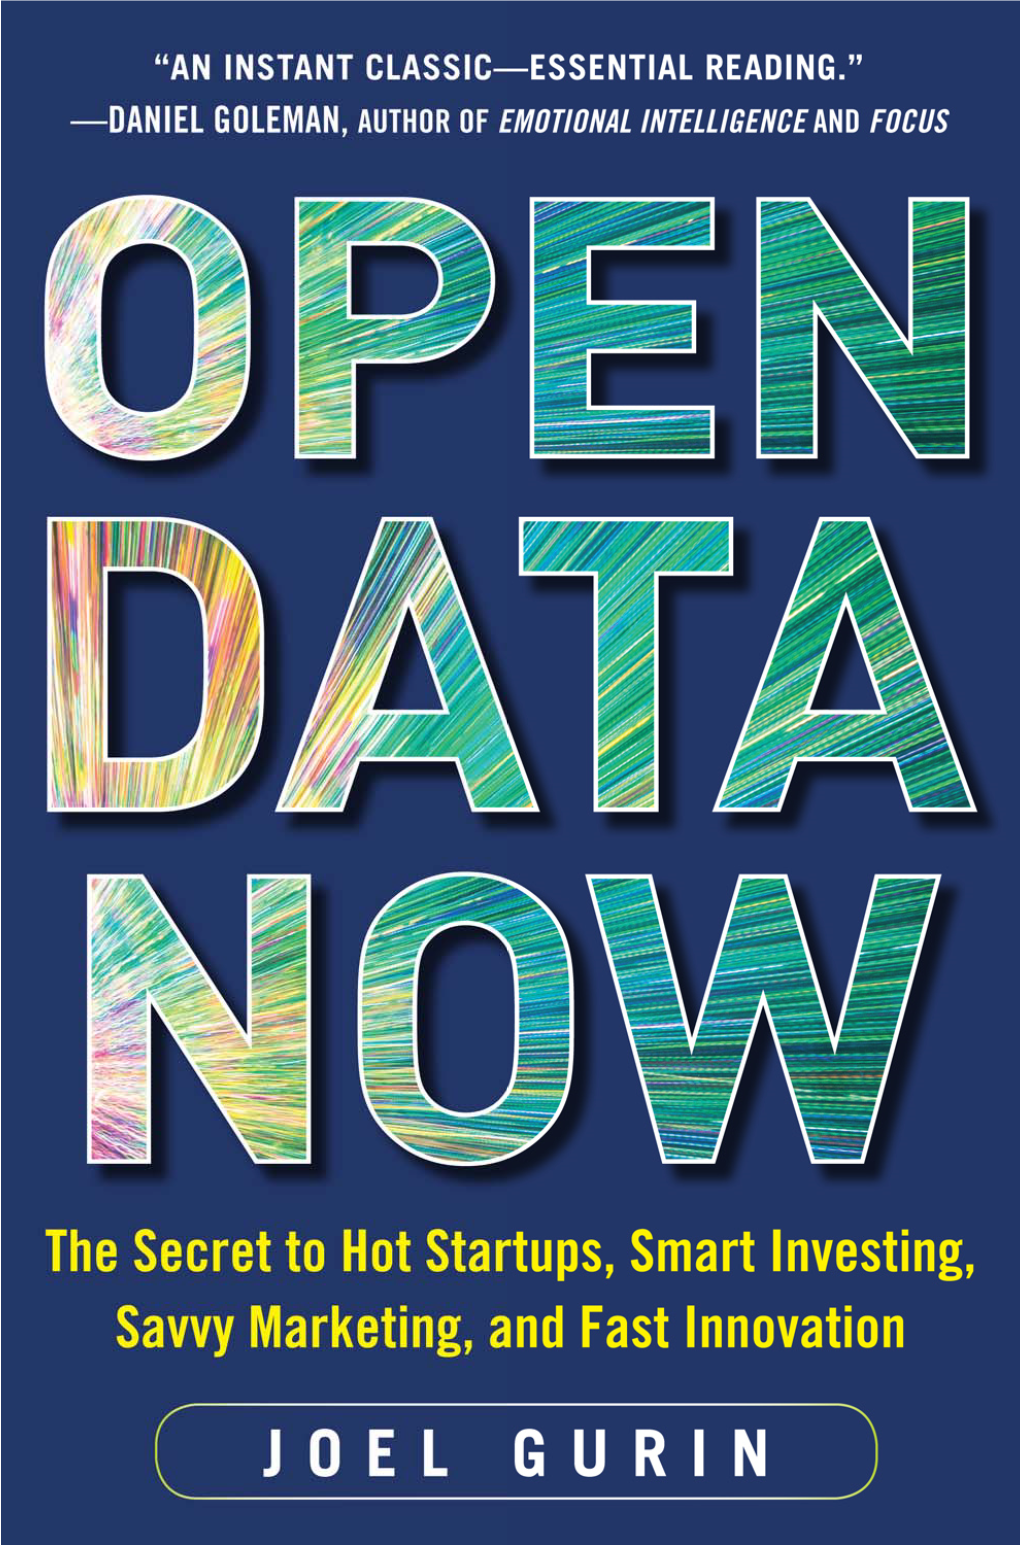 The Secret to Hot Startups, Smart Investing, Savvy Marketing, and Fast Innovation